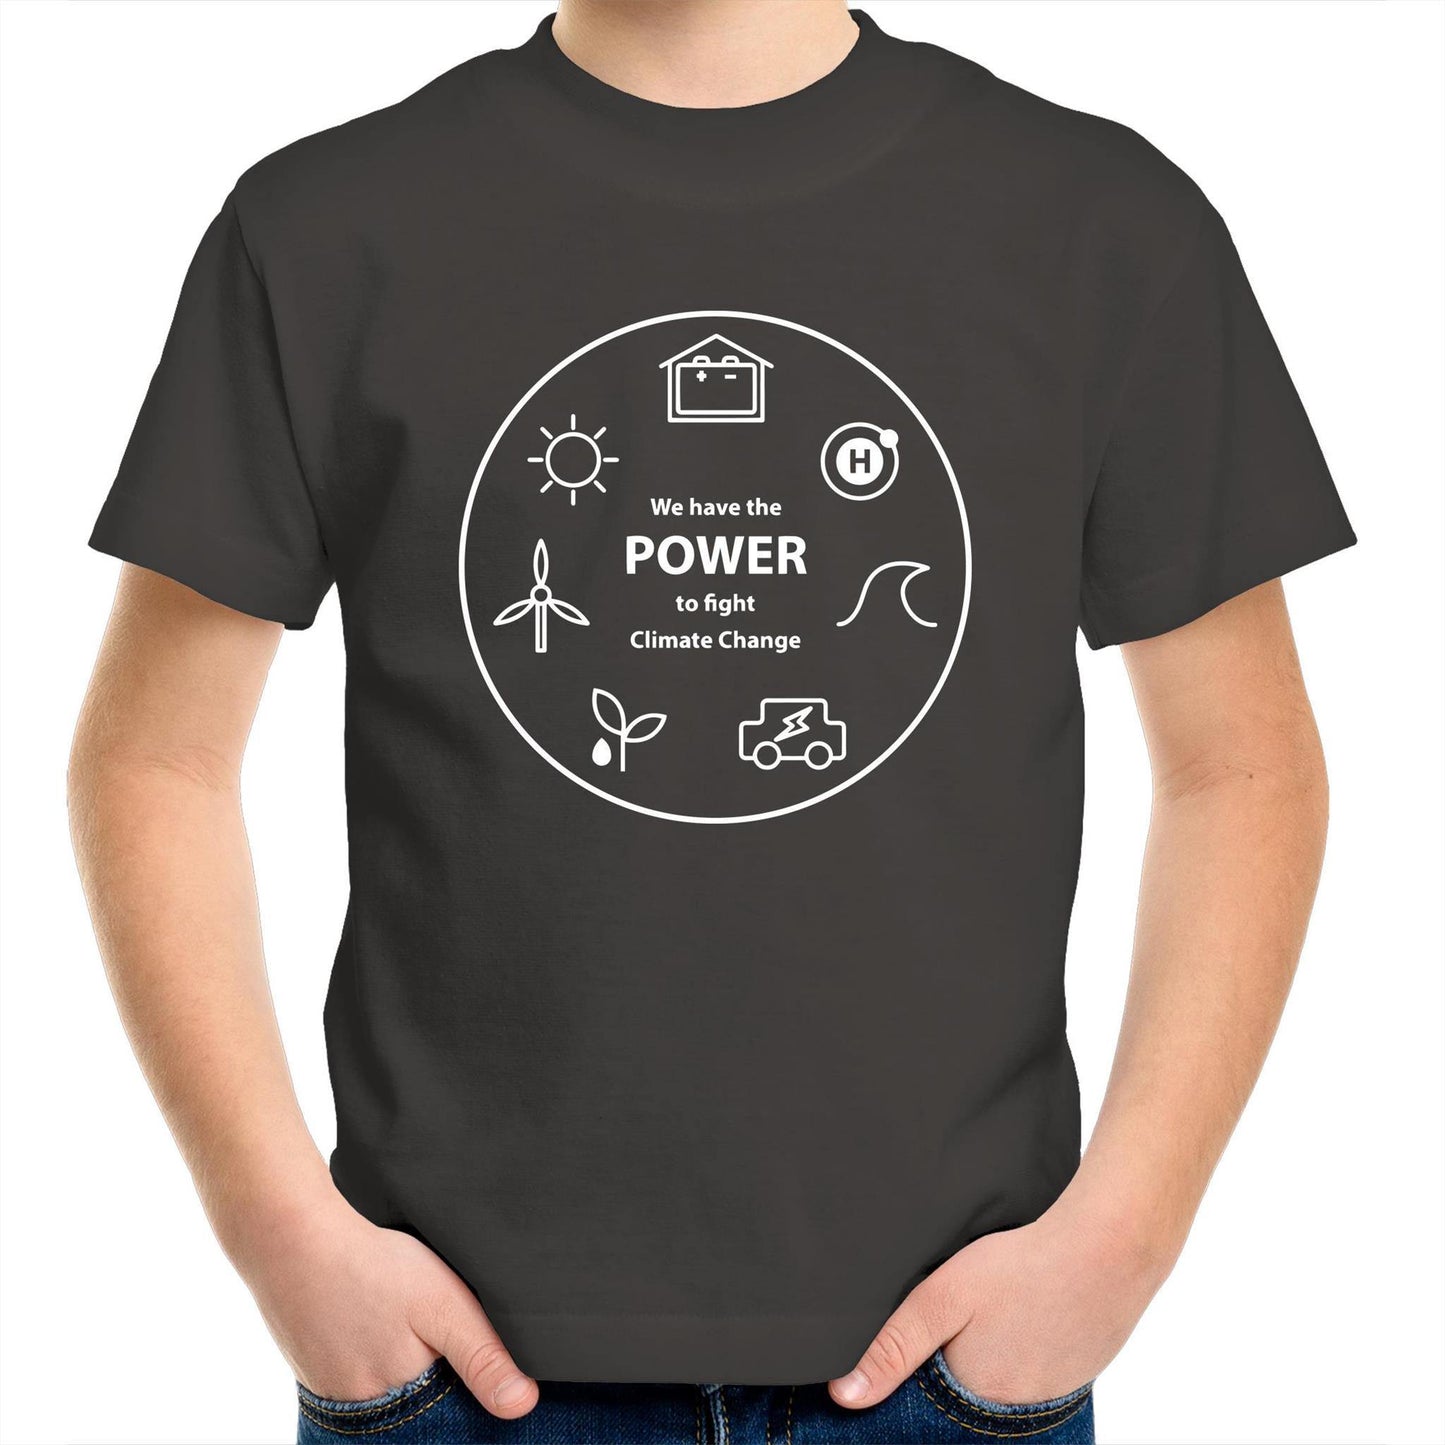 We Have The Power - Kids Youth Crew T-Shirt Charcoal Kids Youth T-shirt Environment